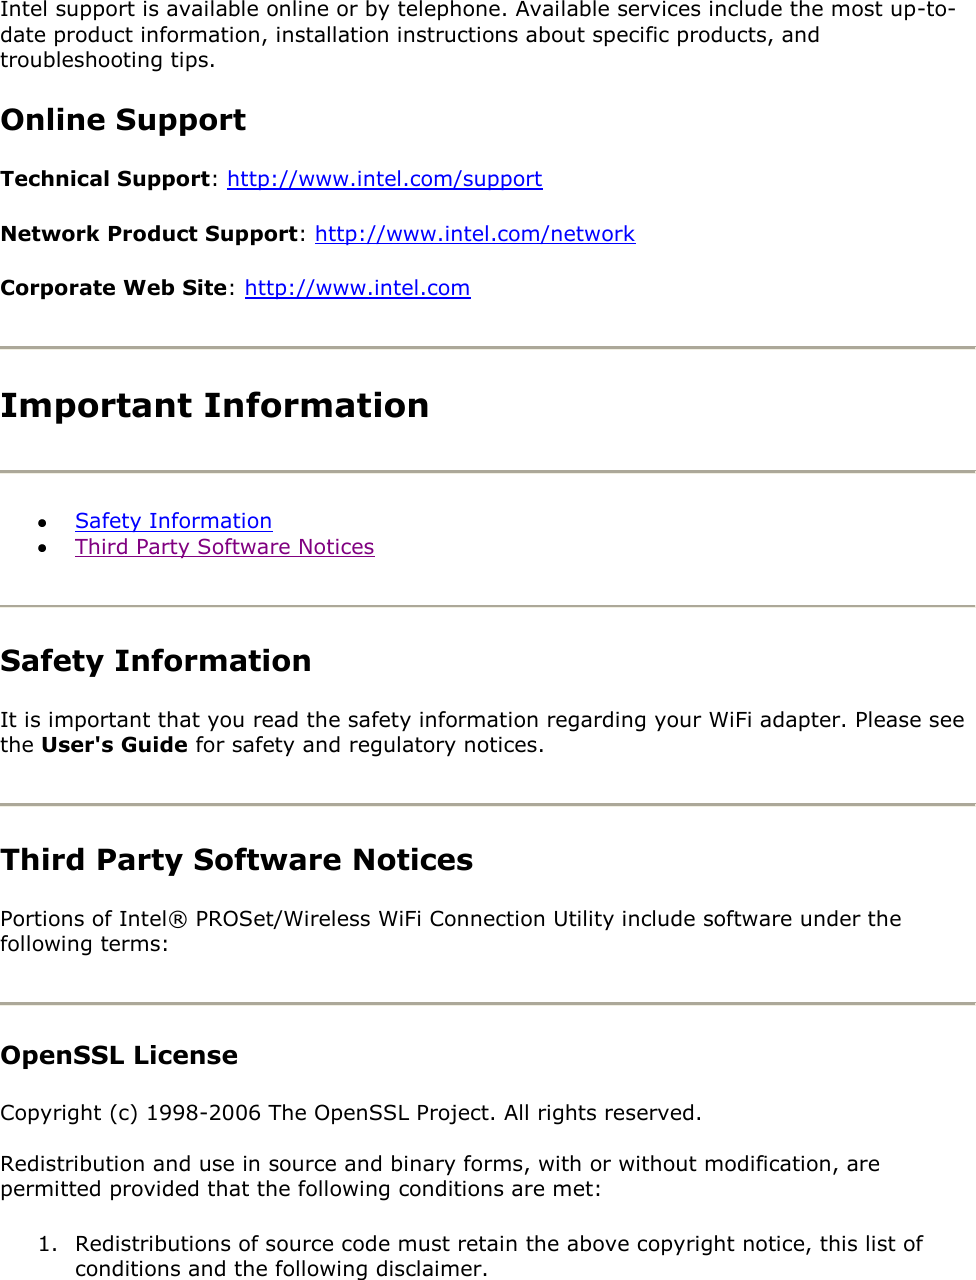 Intel support is available online or by telephone. Available services include the most up-to-date product information, installation instructions about specific products, and troubleshooting tips. Online Support Technical Support: http://www.intel.com/support Network Product Support: http://www.intel.com/network Corporate Web Site: http://www.intel.com  Important Information   Safety Information  Third Party Software Notices  Safety Information  It is important that you read the safety information regarding your WiFi adapter. Please see the User&apos;s Guide for safety and regulatory notices.  Third Party Software Notices Portions of Intel® PROSet/Wireless WiFi Connection Utility include software under the following terms:  OpenSSL License Copyright (c) 1998-2006 The OpenSSL Project. All rights reserved.  Redistribution and use in source and binary forms, with or without modification, are permitted provided that the following conditions are met:  1. Redistributions of source code must retain the above copyright notice, this list of conditions and the following disclaimer. 